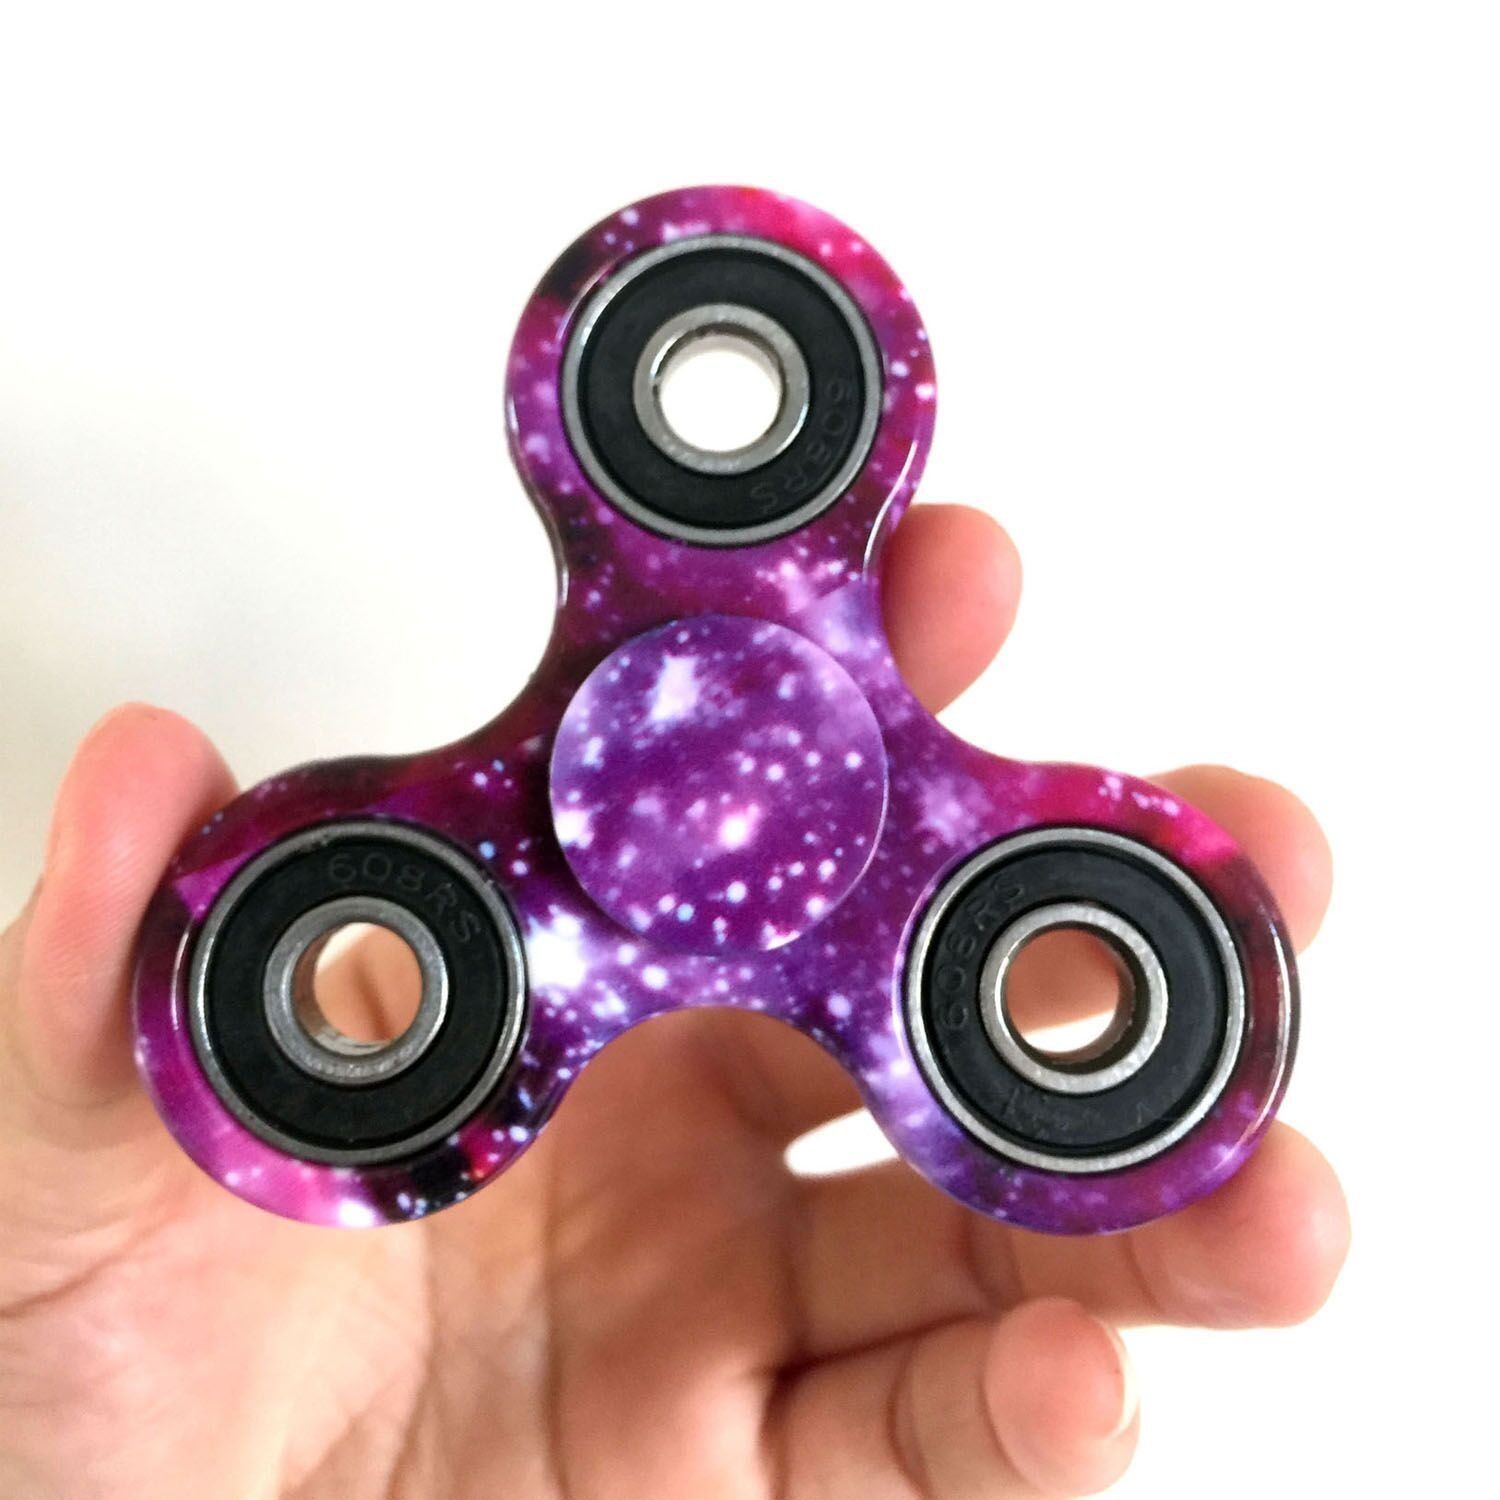 D-JOY Tri-Spinner Fidget Toy Hand Spinner Camouflage Stress Reducer Relieve Anxiety and Boredom Camo (Starry sky)